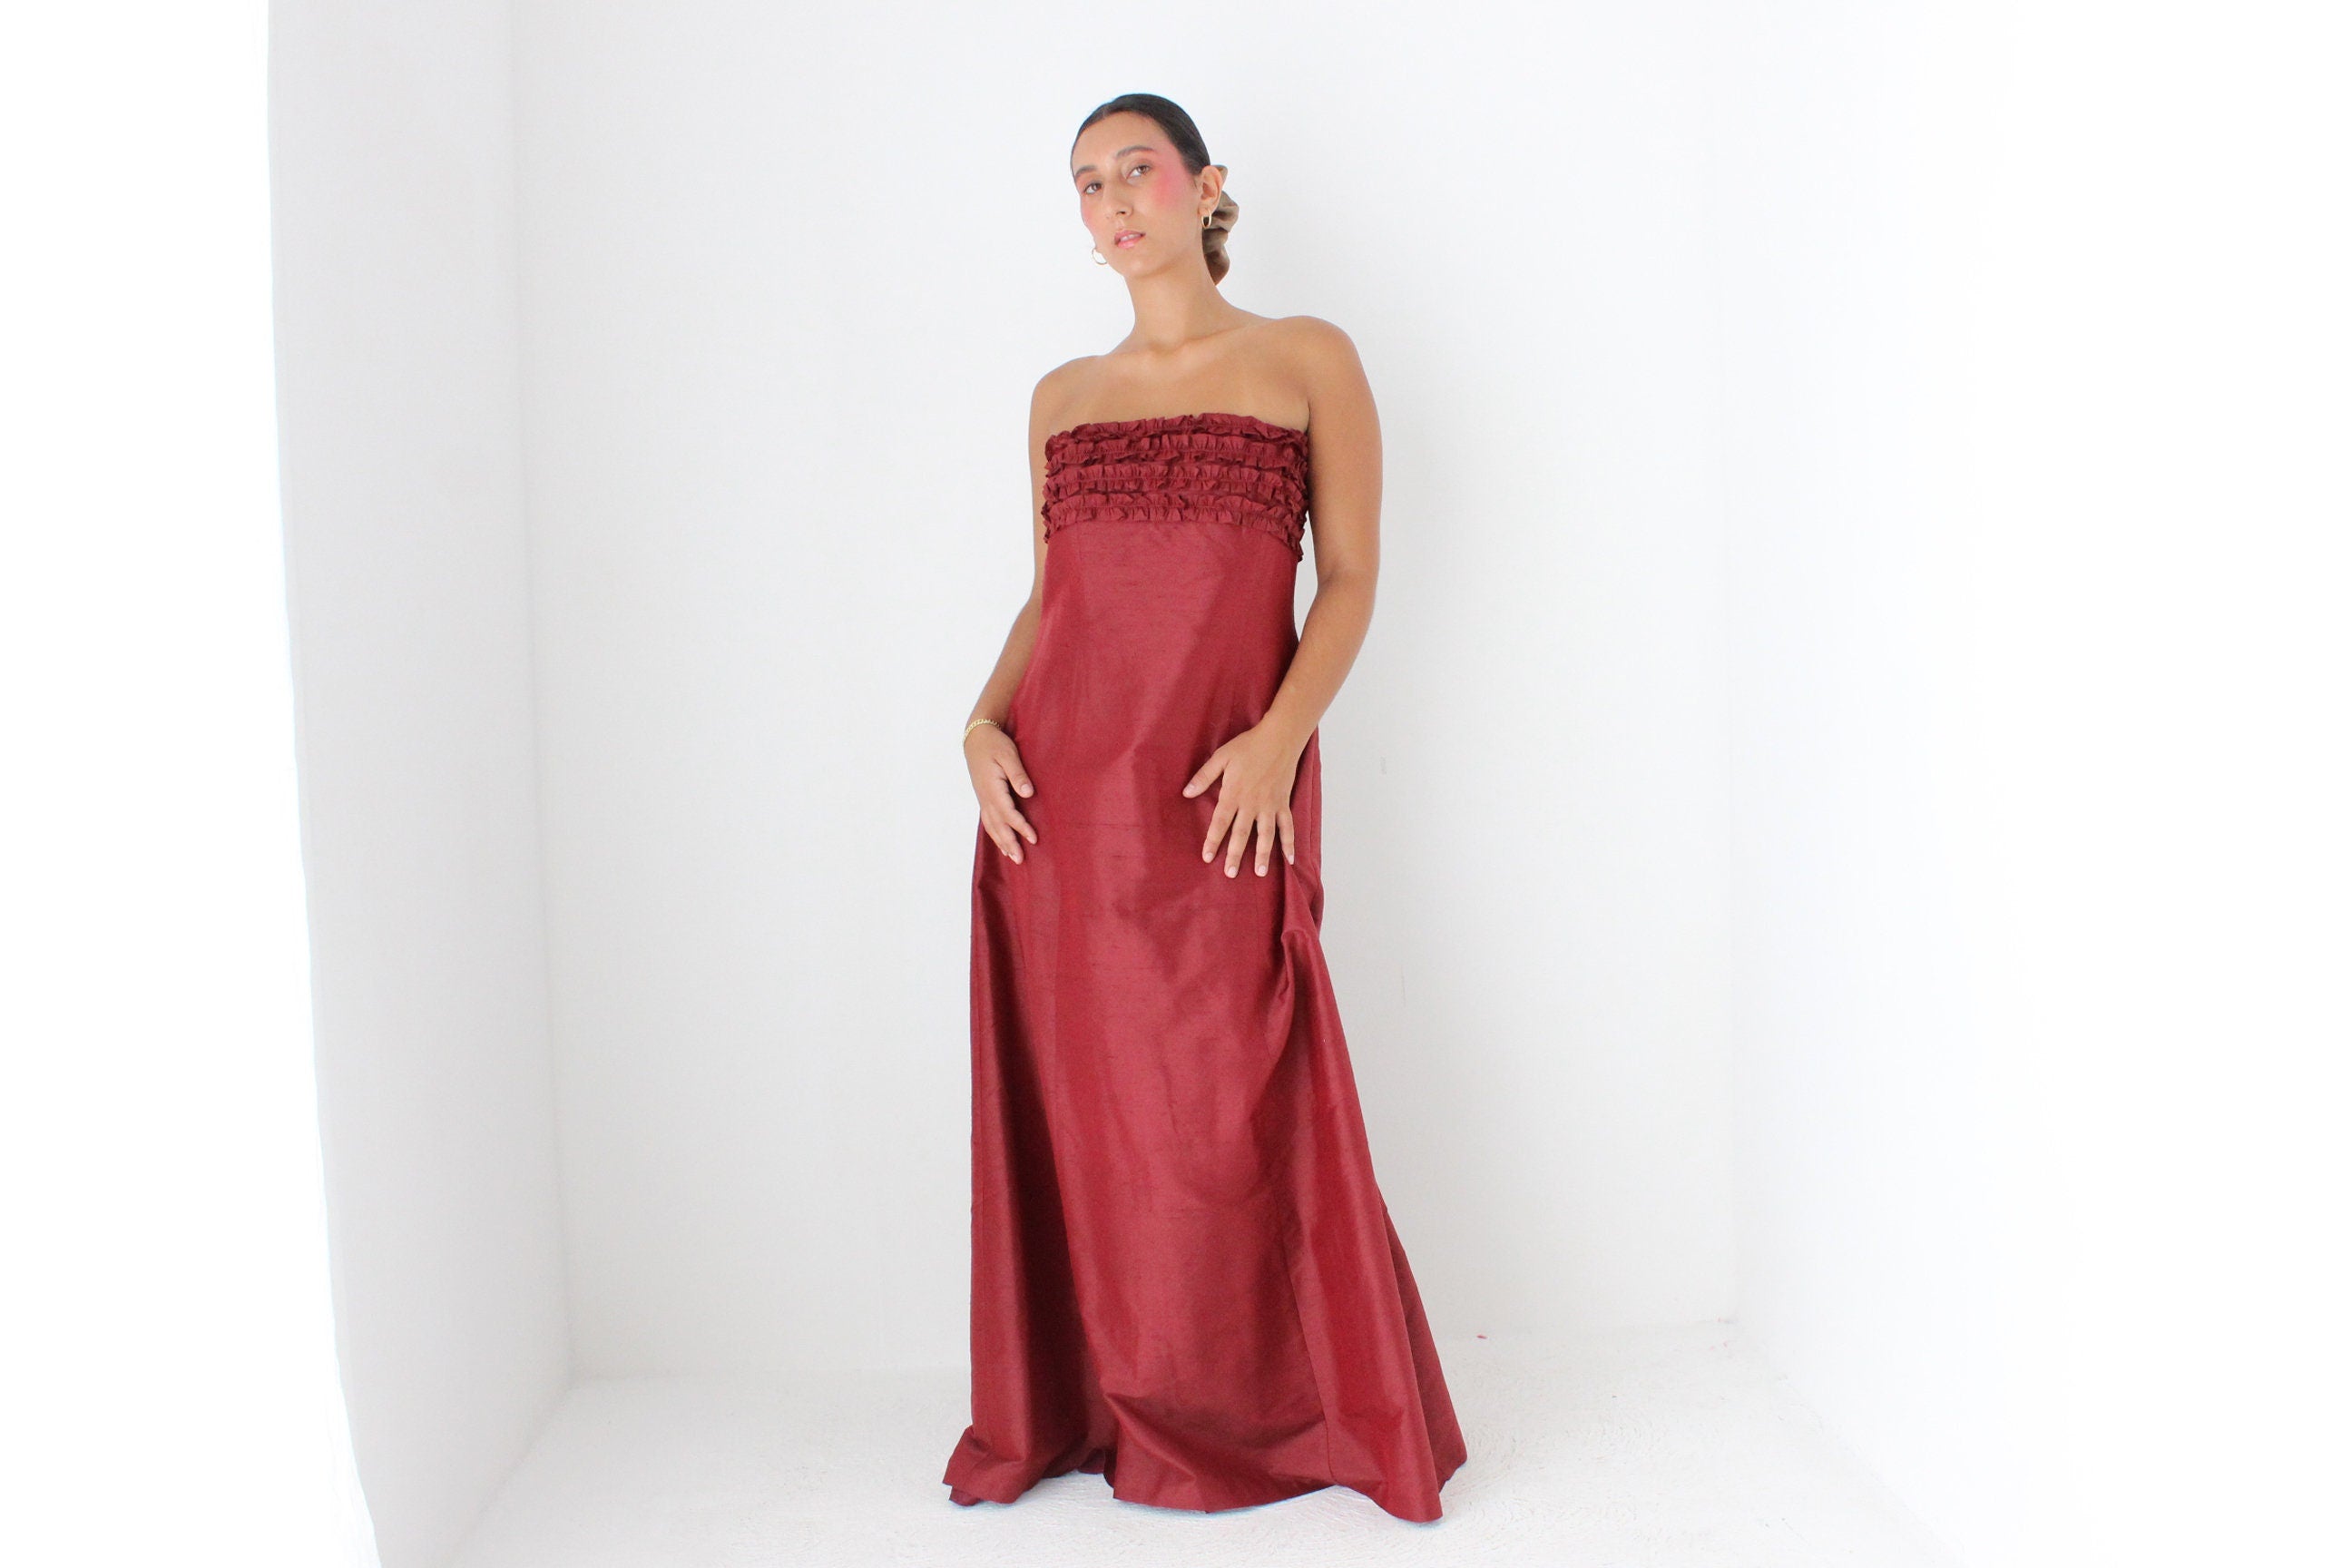 2000s Raw Silk Strapless Ruffle Formal Gown